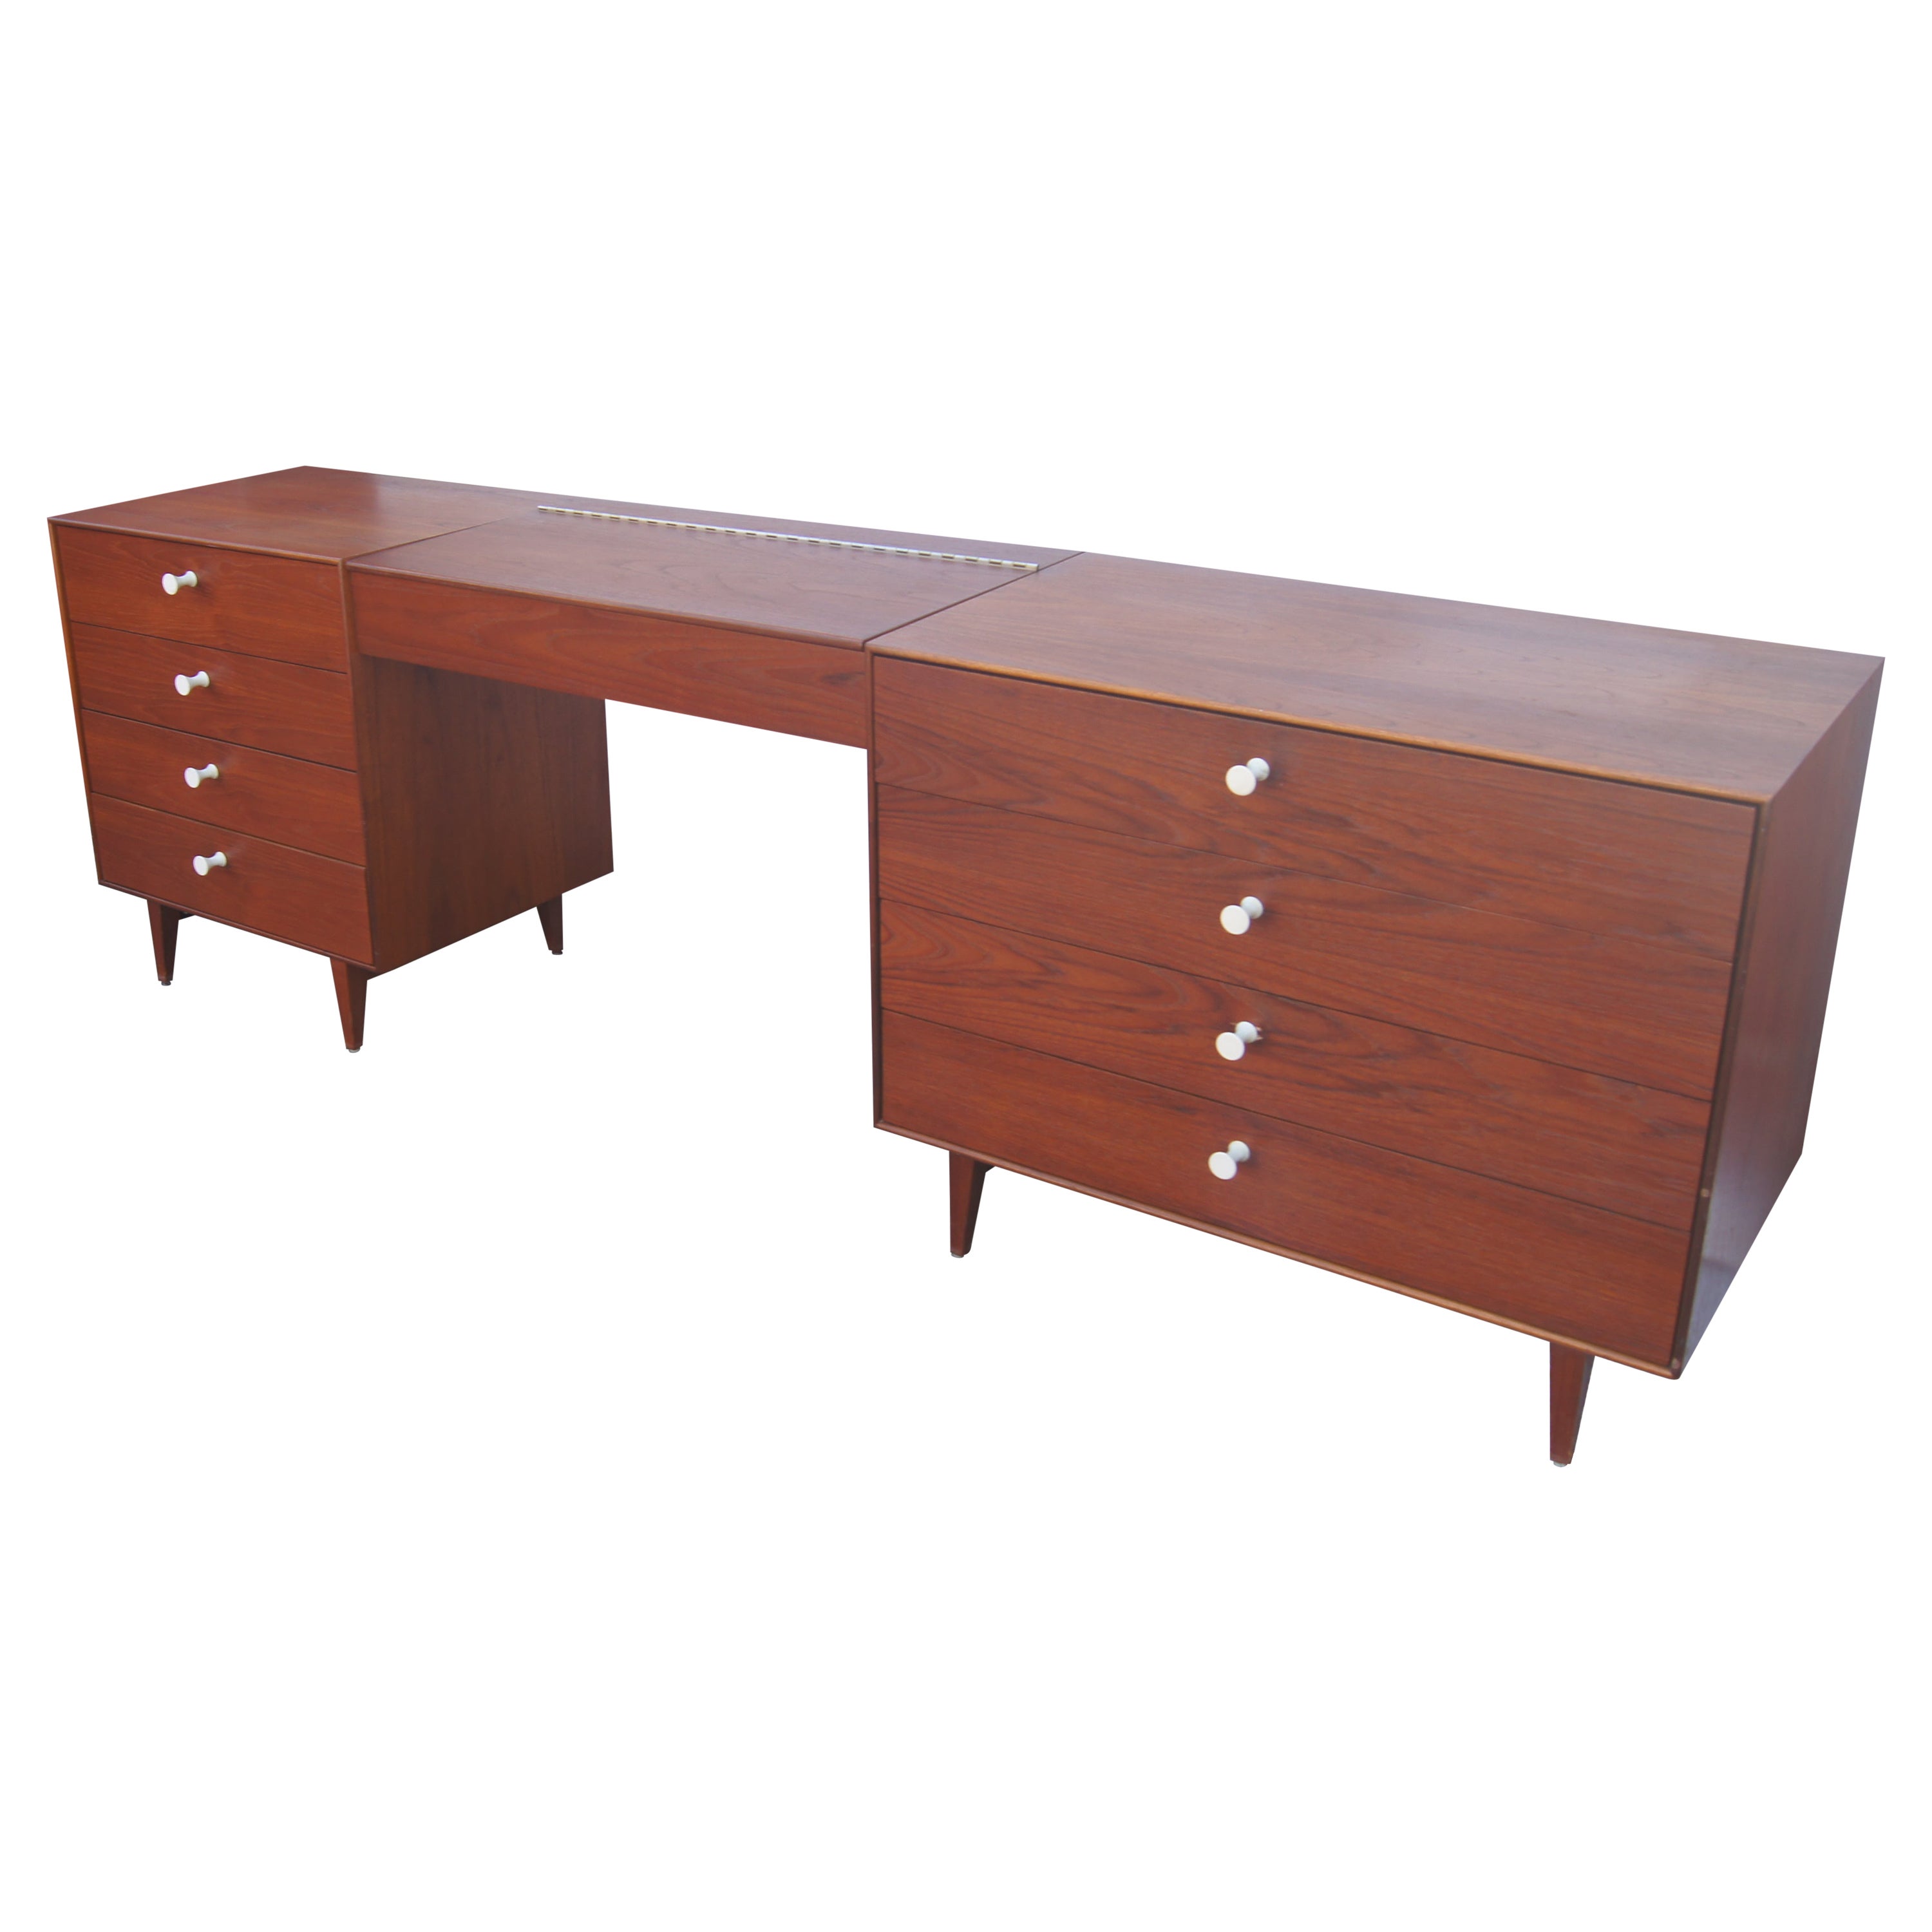 Teak Thin Edge Double Dresser with Vanity by George Nelson for Herman Miller